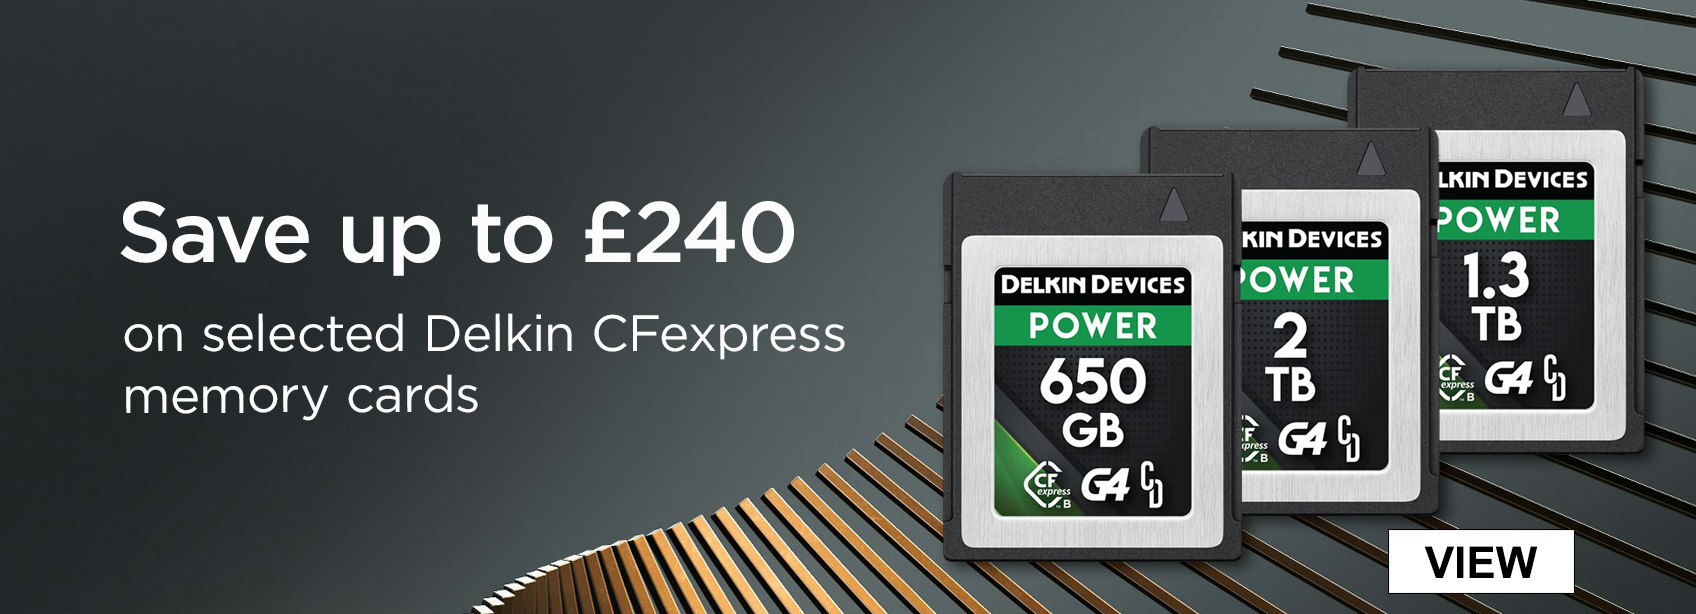 Save up to £240 on selected Delkin CFexpress memory cards